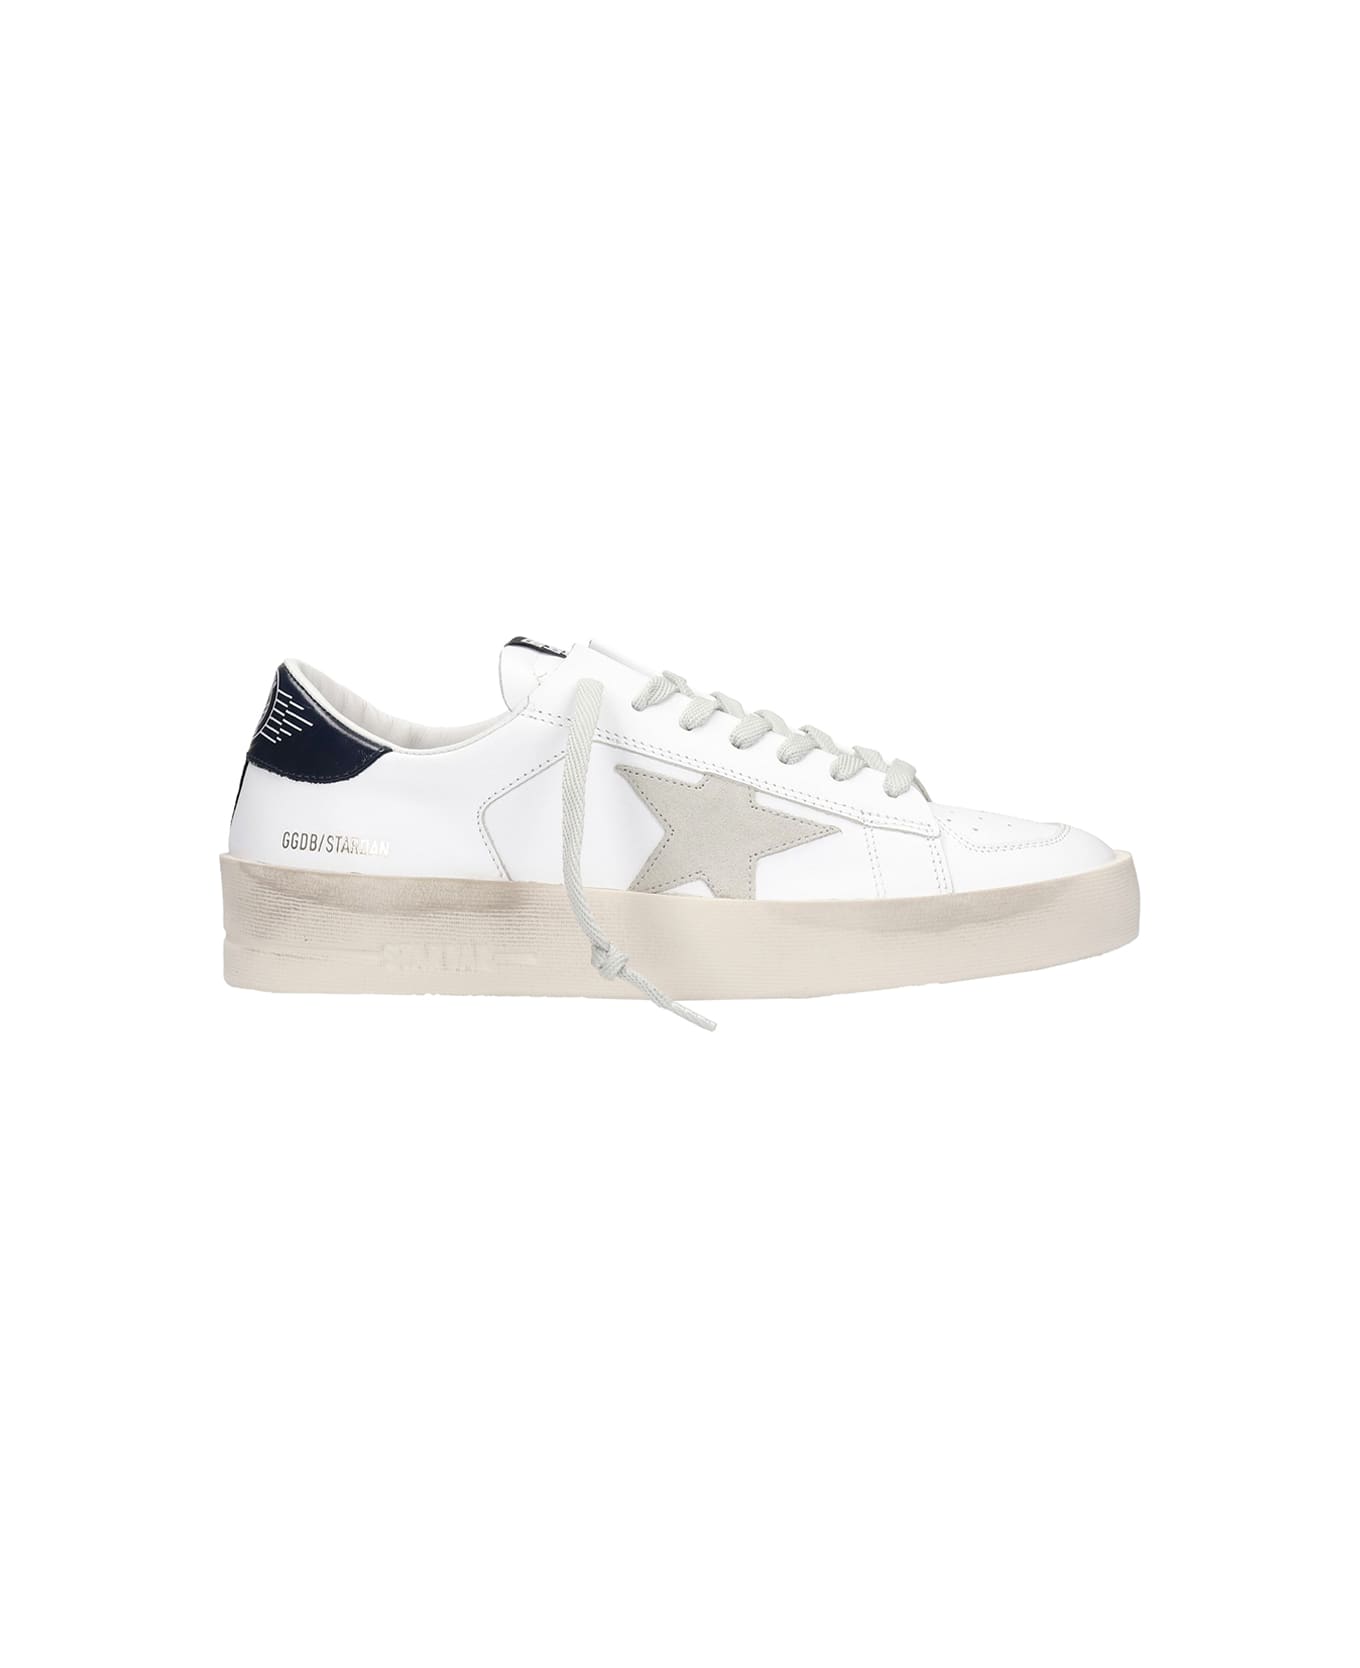 Golden Goose Stardan Leather Upper Suede Star Shiny Leather Heel - White Ice Blue